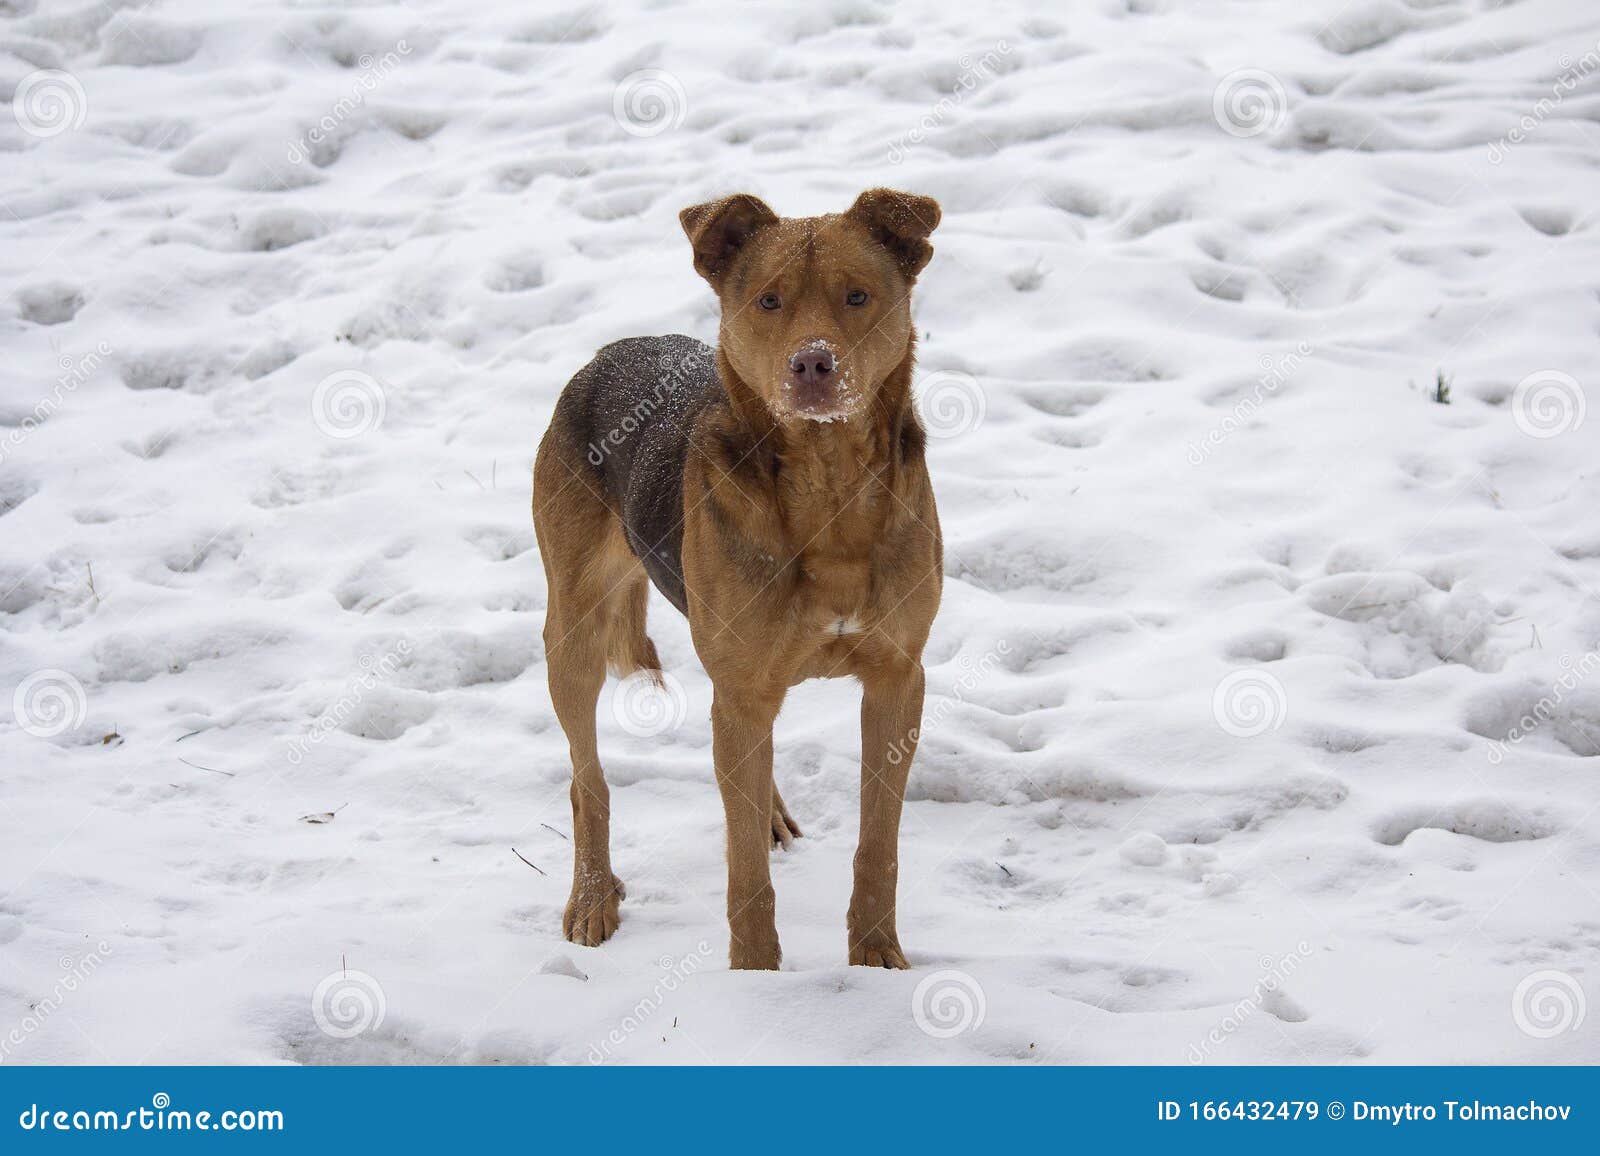 Hungry Stray Dog in the Snow in Winter Stock Image - Image of animals,  cool: 166432479